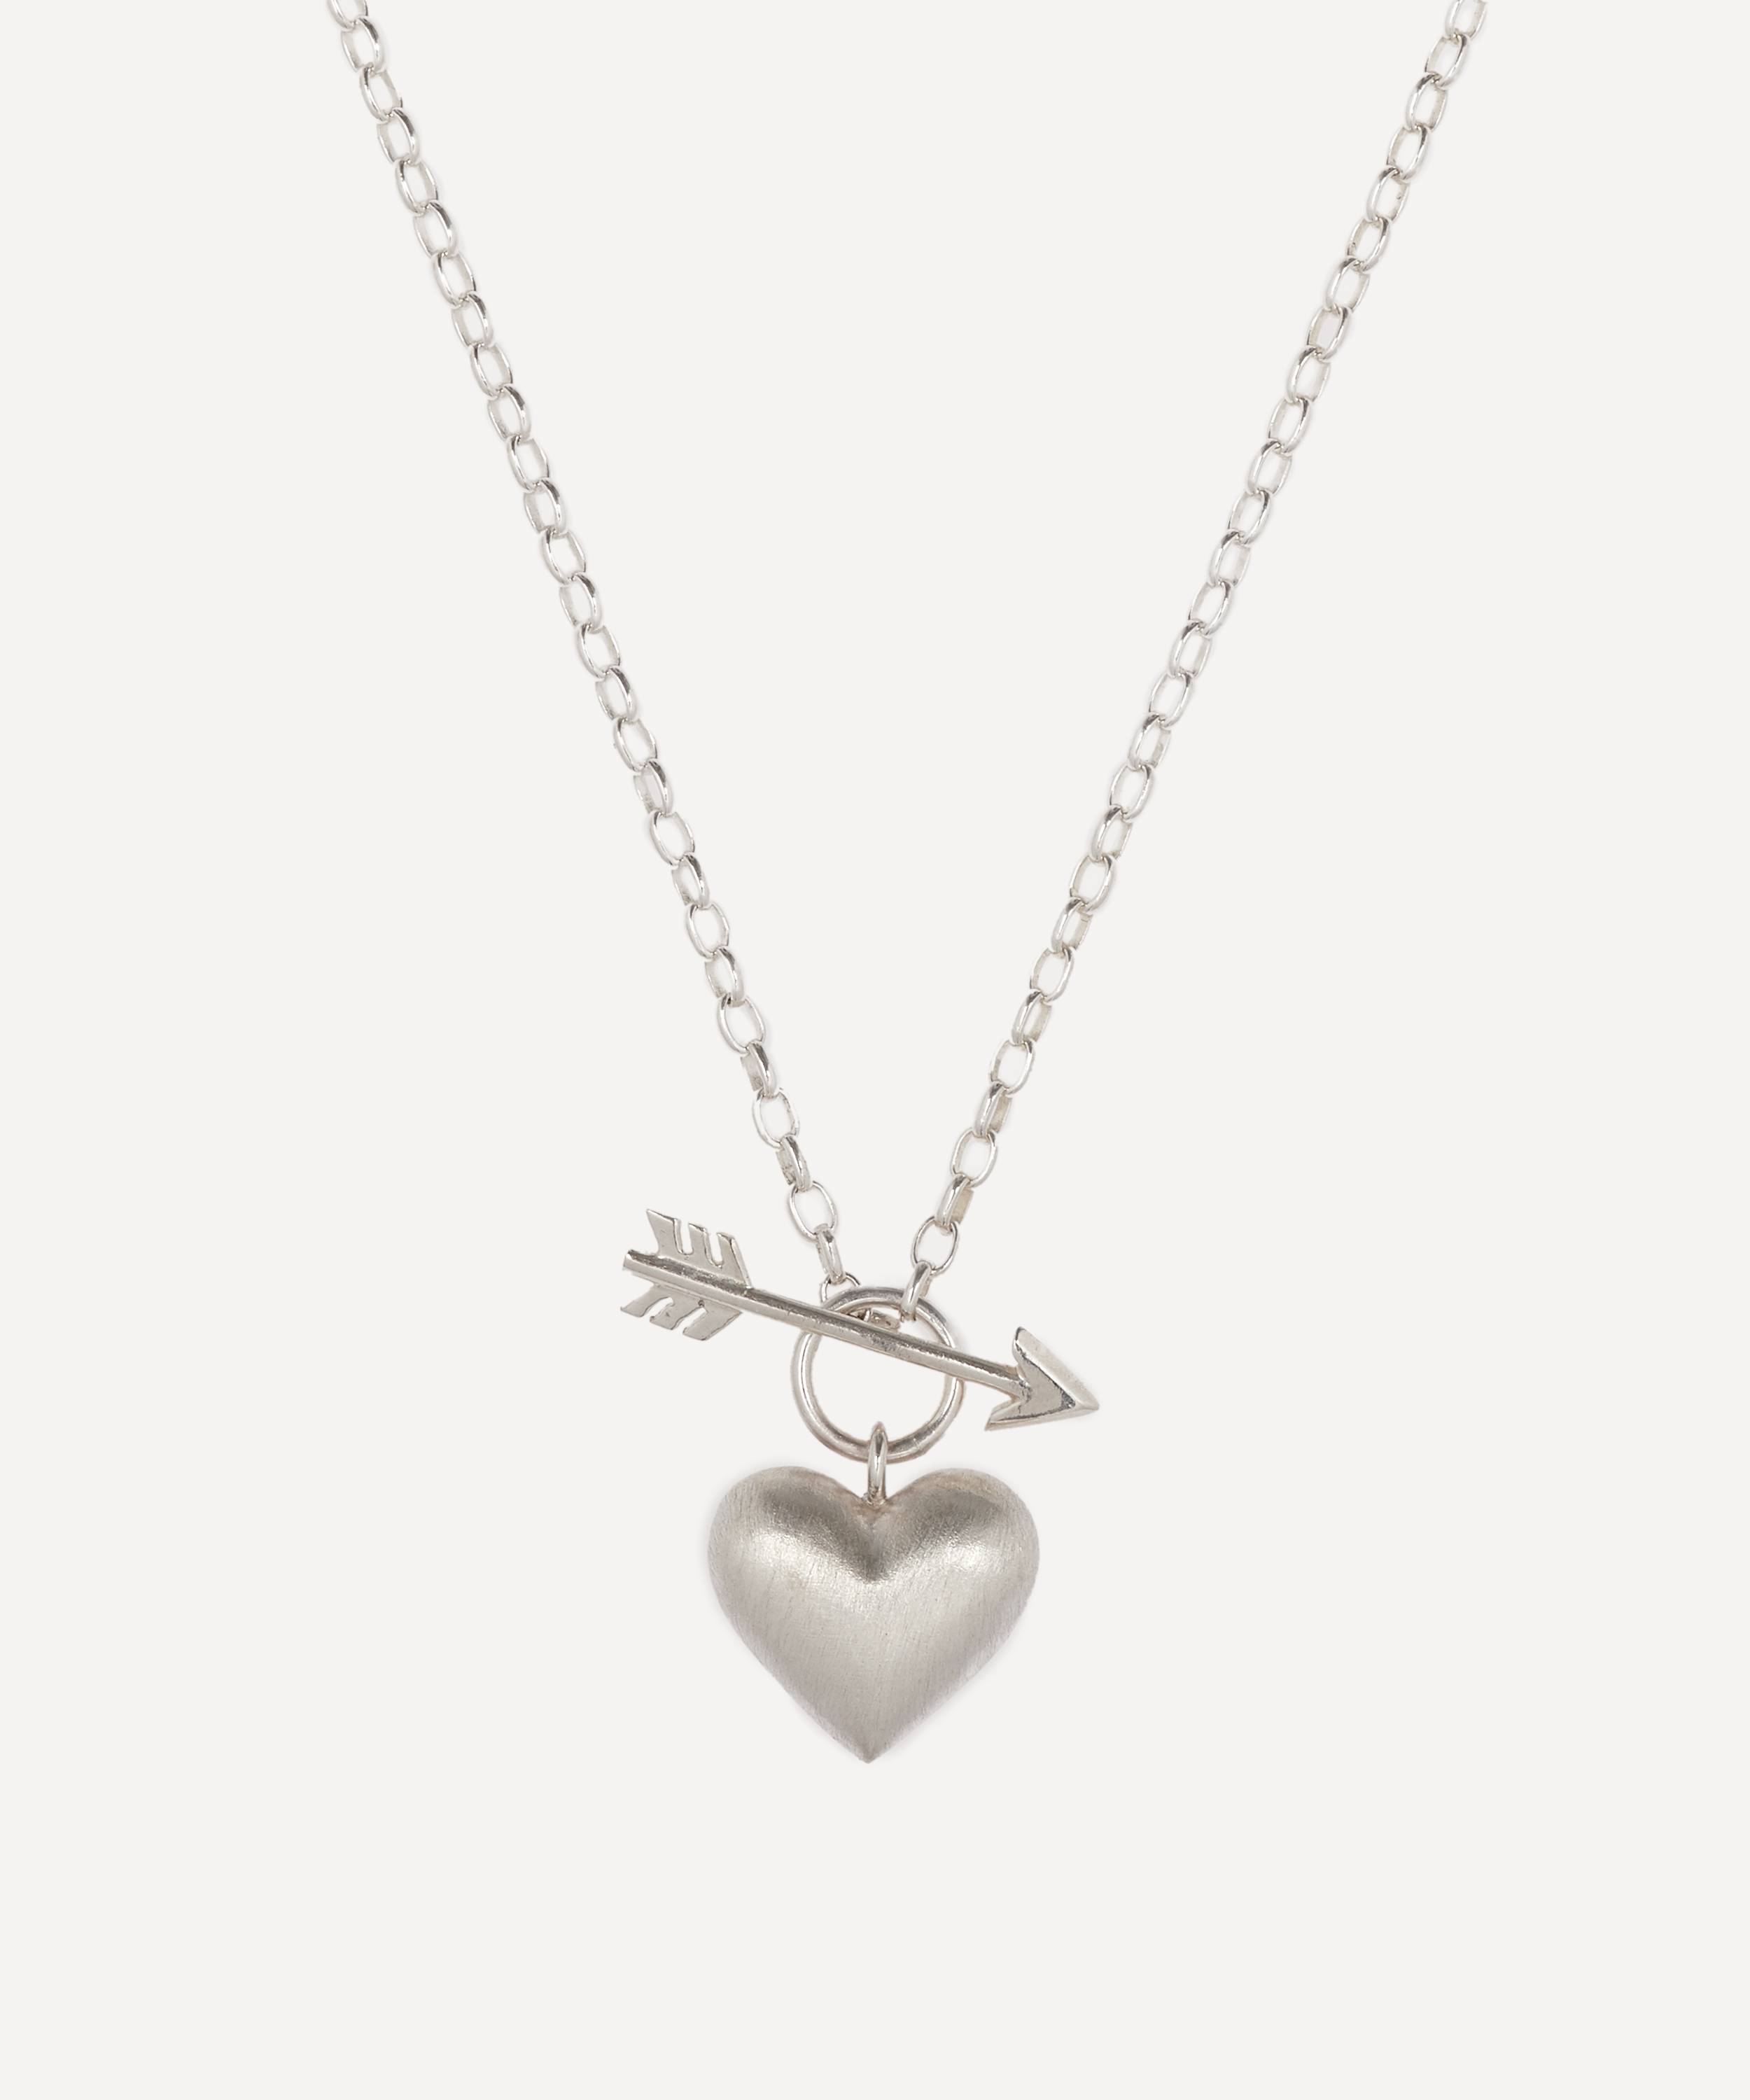 Rachel Quinn Sterling Silver Small Cupid’s Heart Pendant Necklace | Liberty